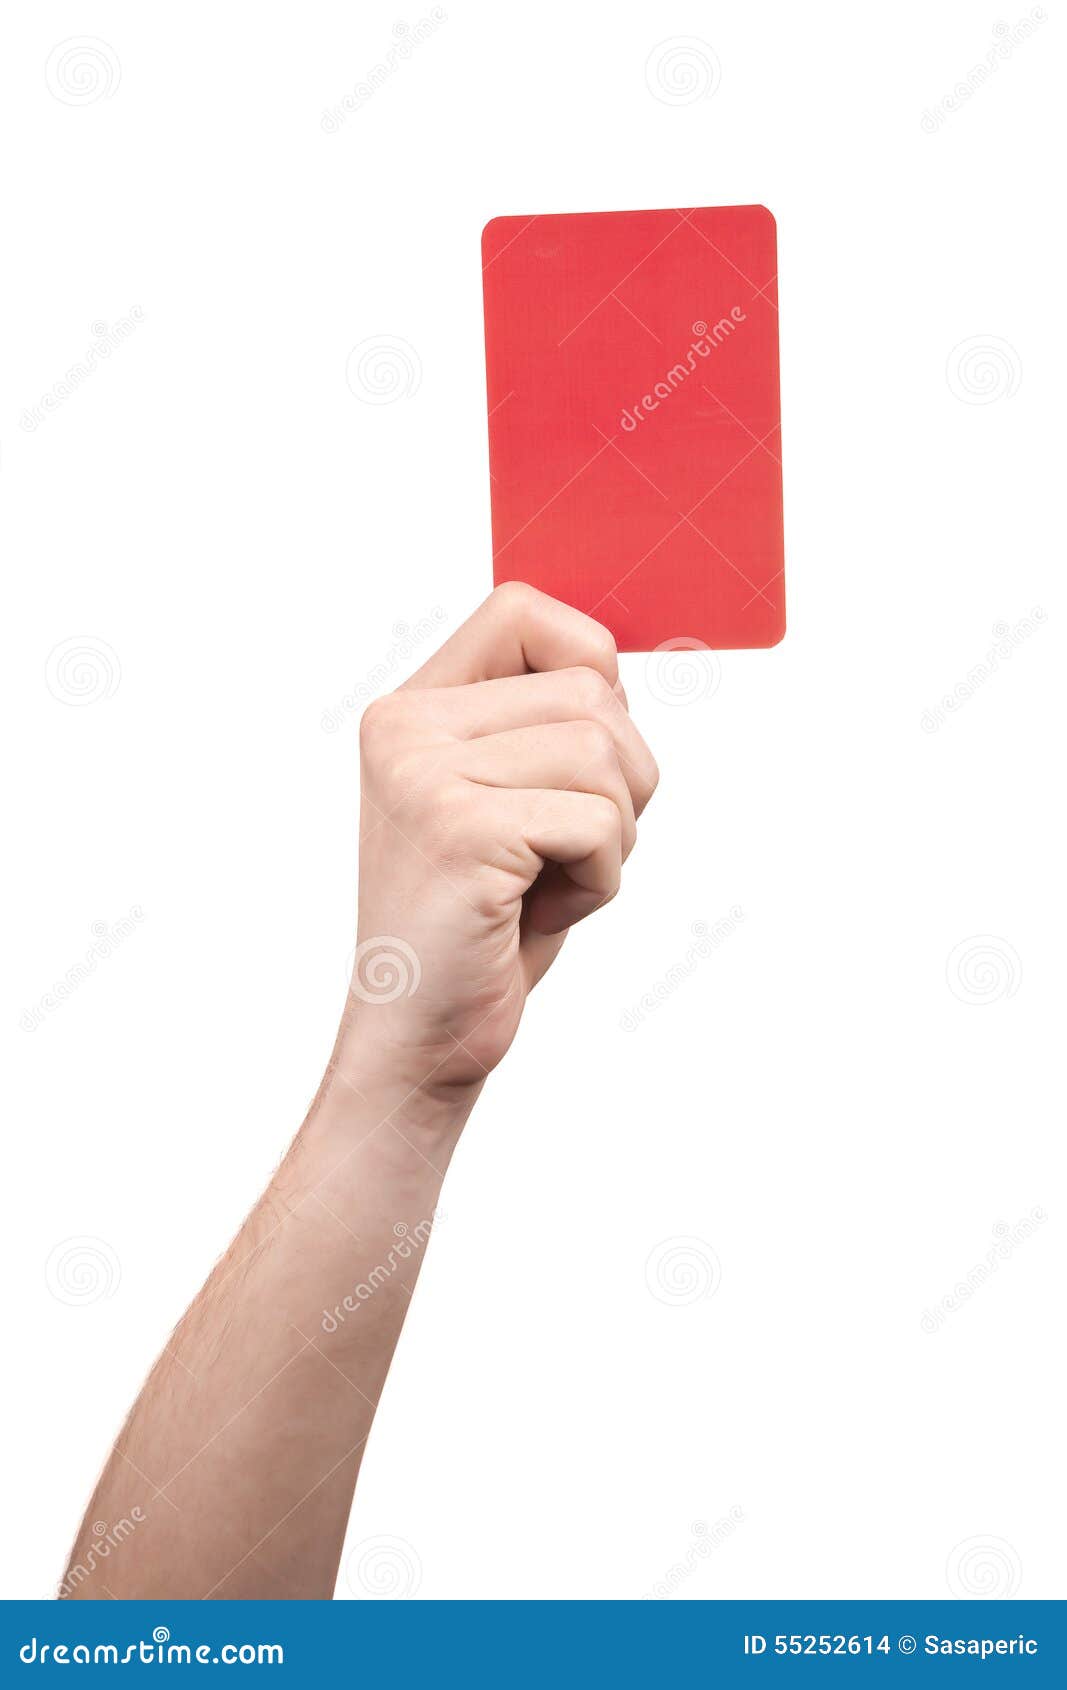 Soccer Referee Hand Holding Red Card Stock Photo - Image of dismissal,  white: 55252614